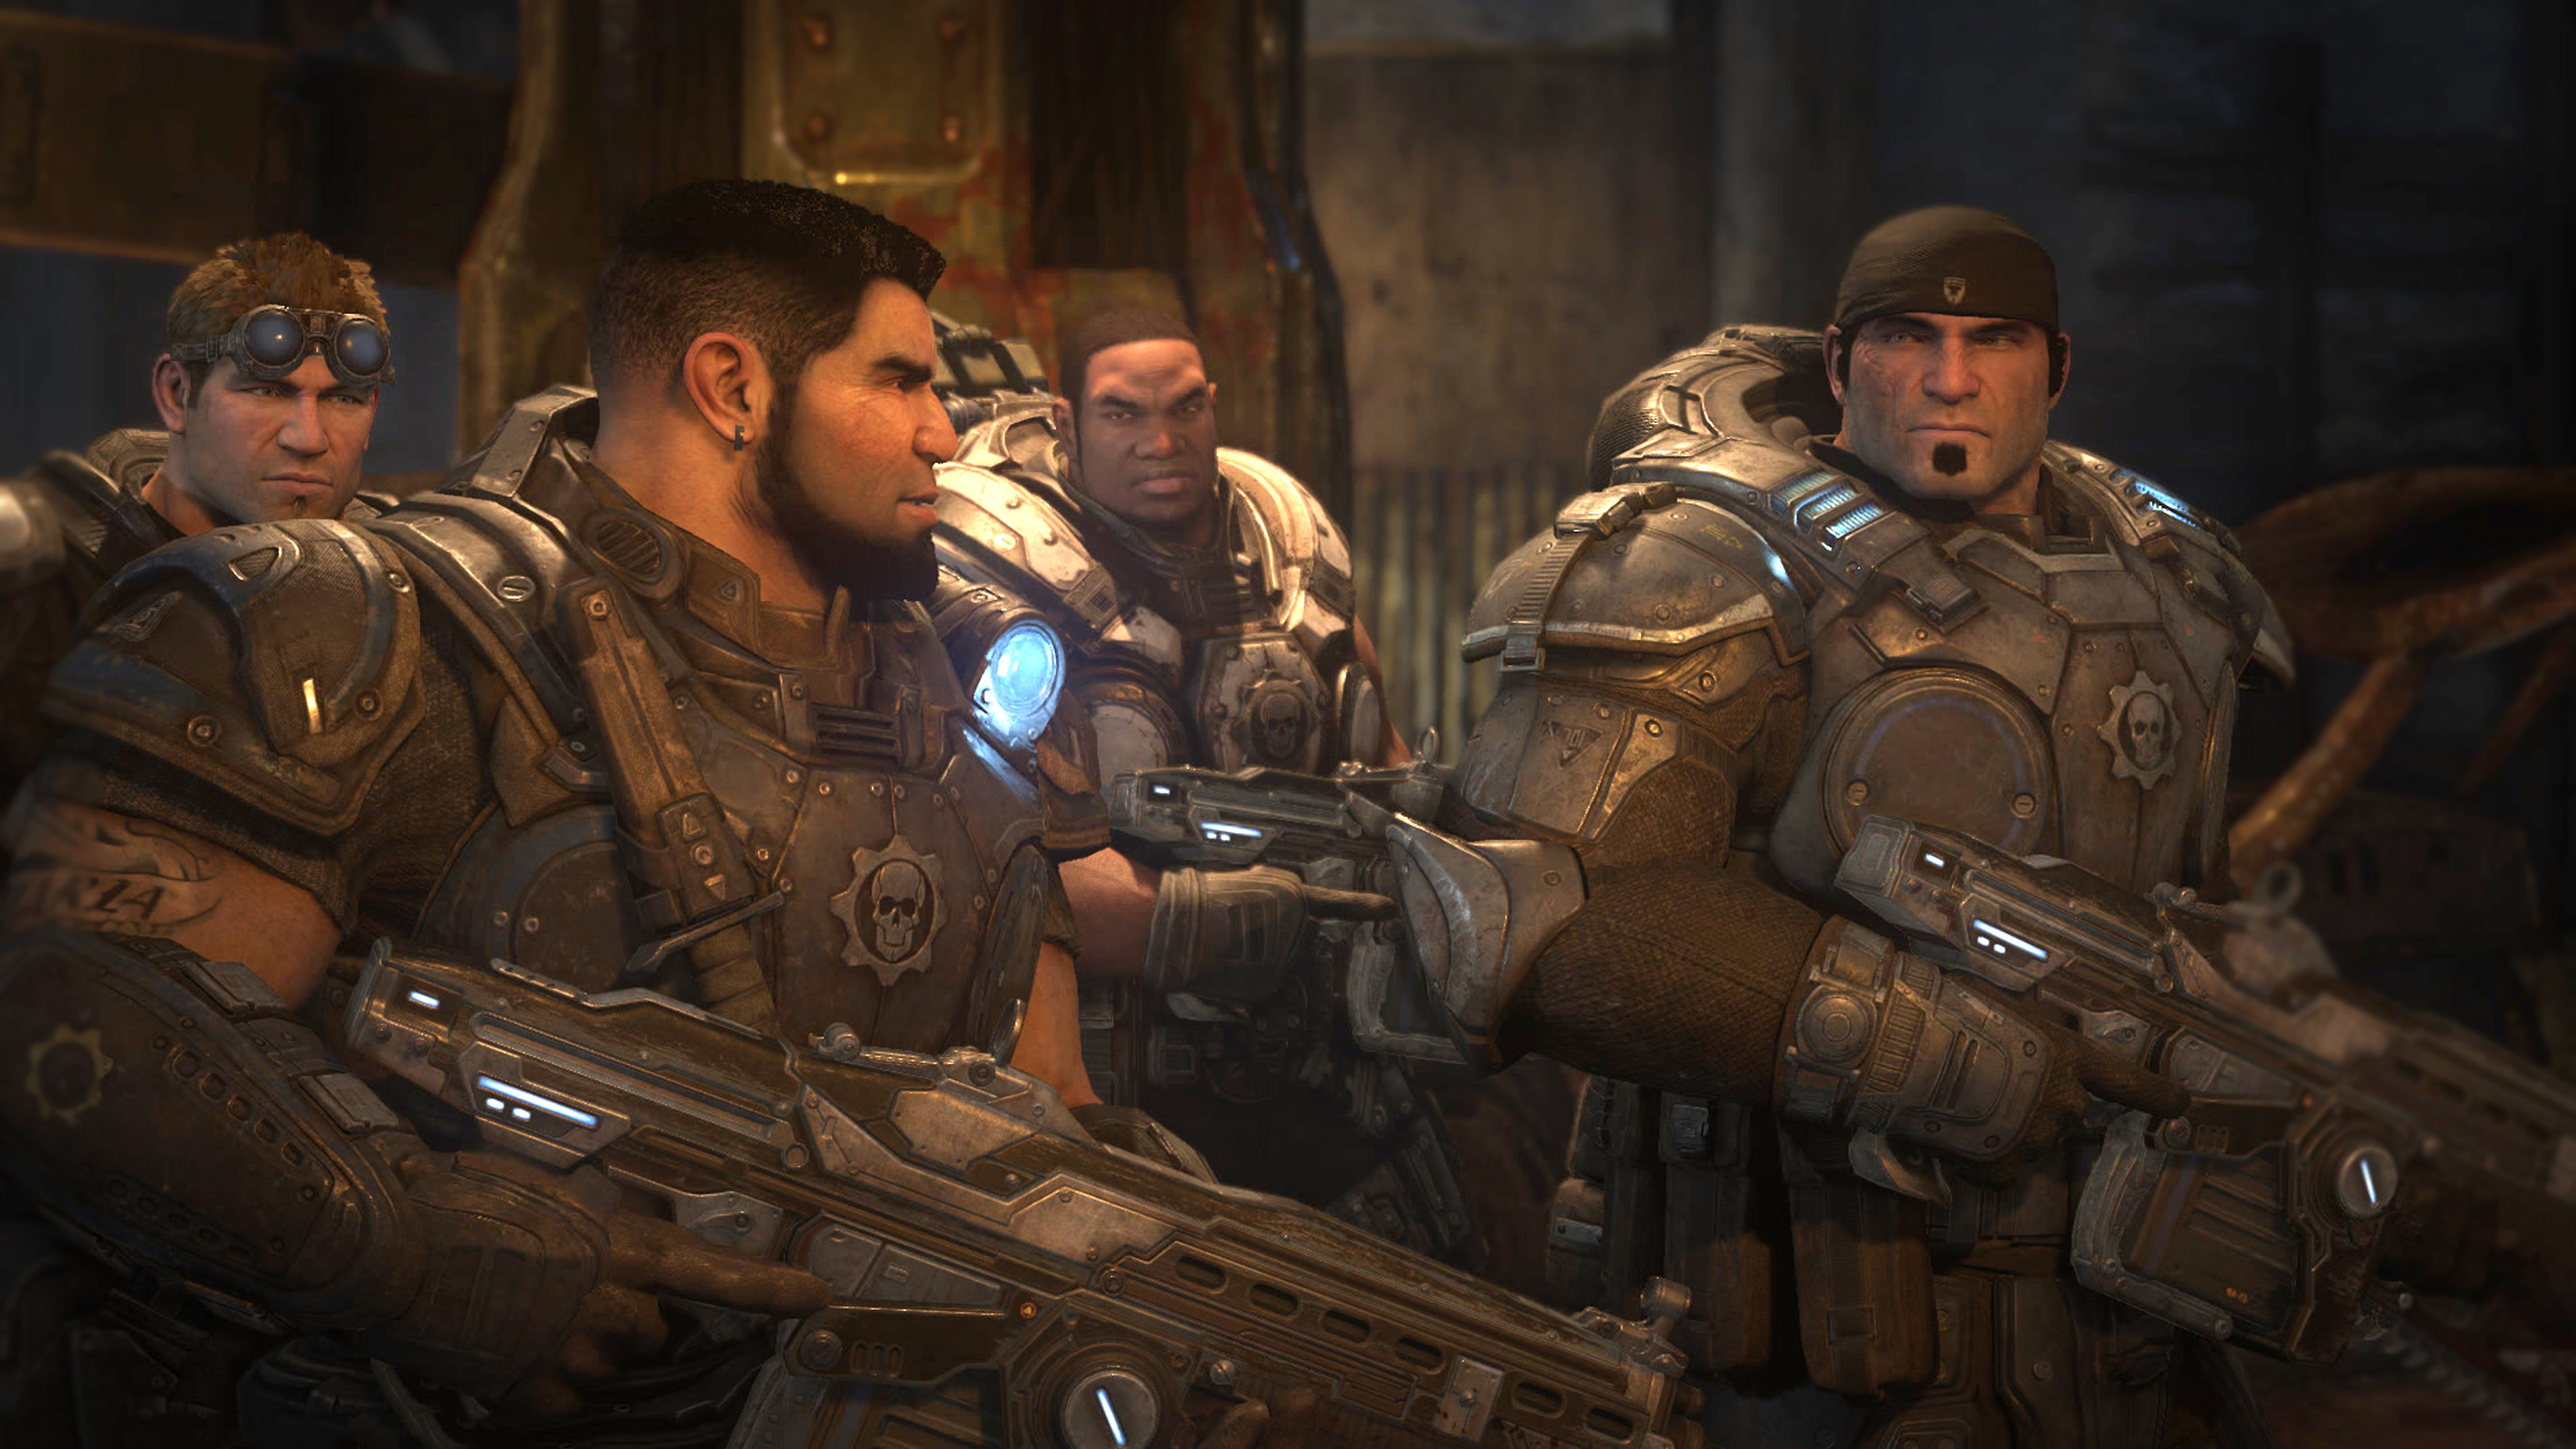 Gears of War 3, COG Tags & Collectible Locations - Act 5